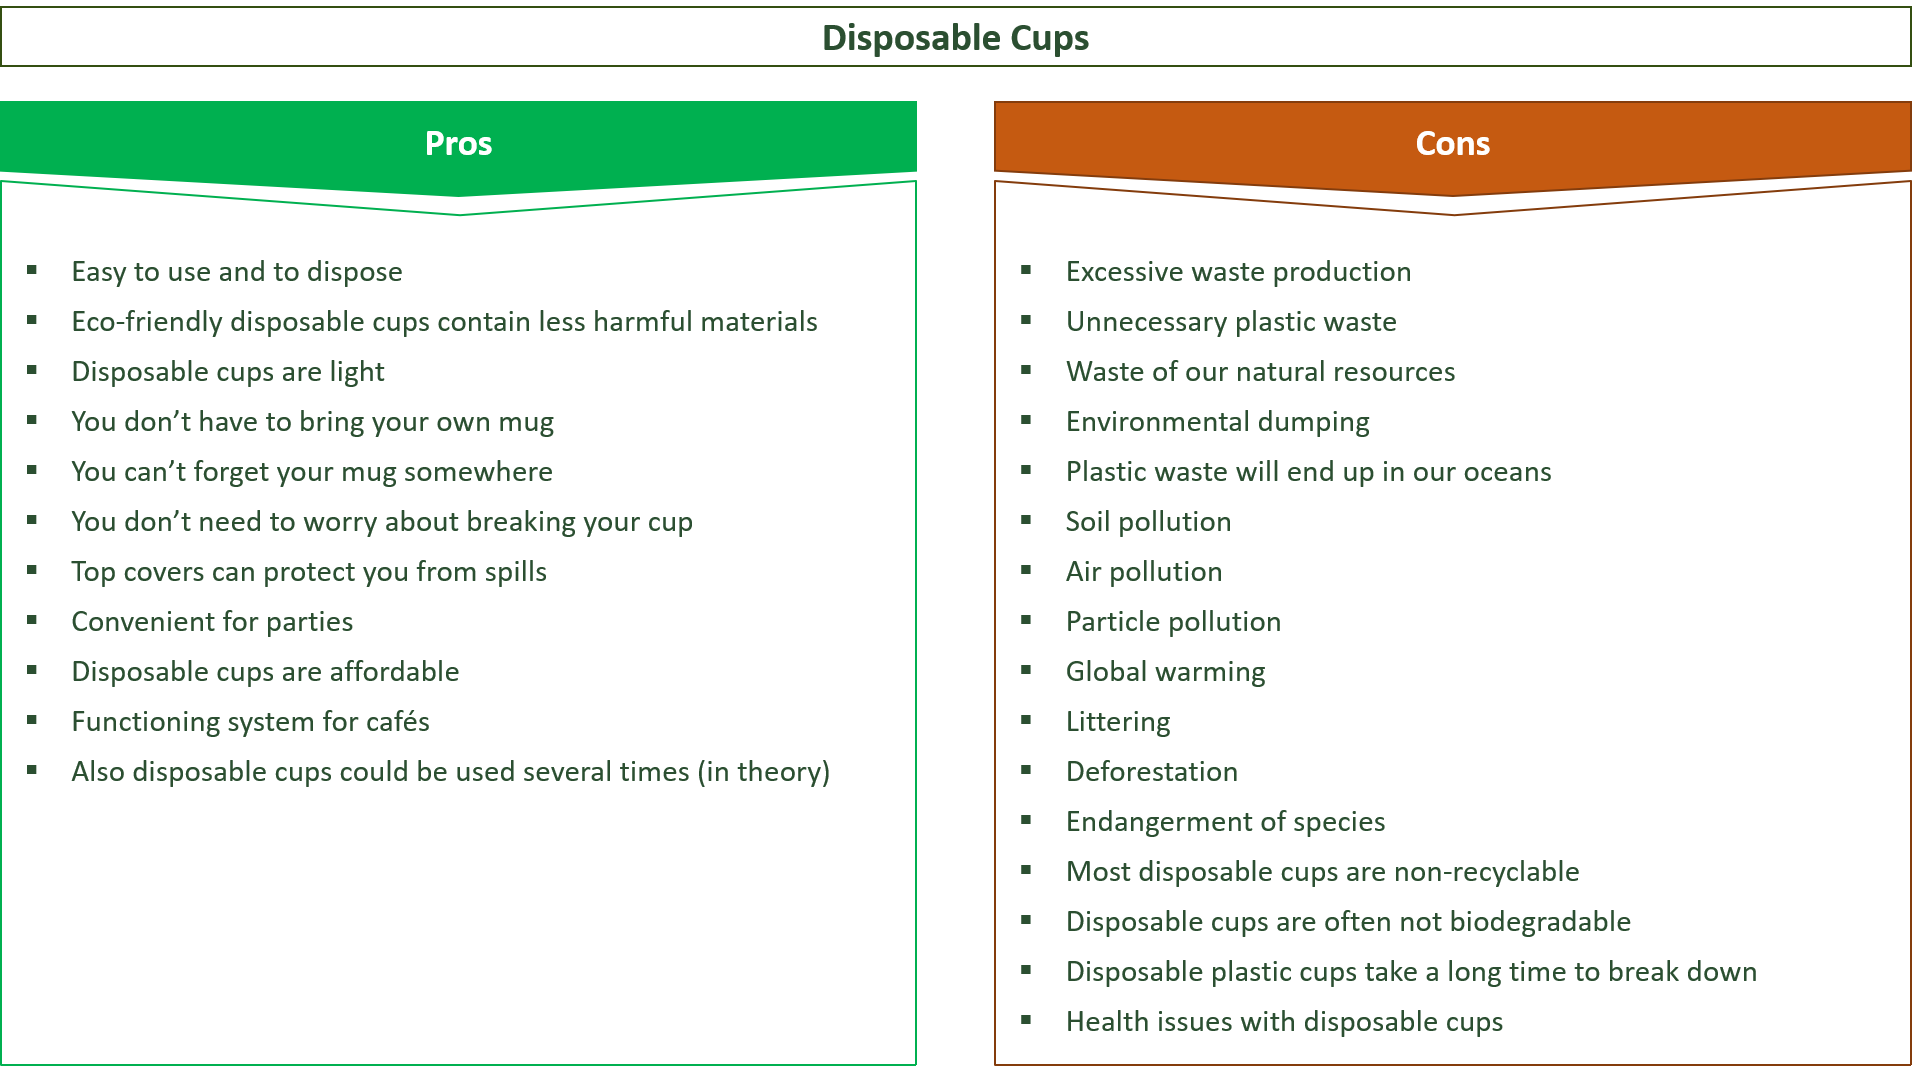 advantages and problems of disposable cups compared to reusable cups